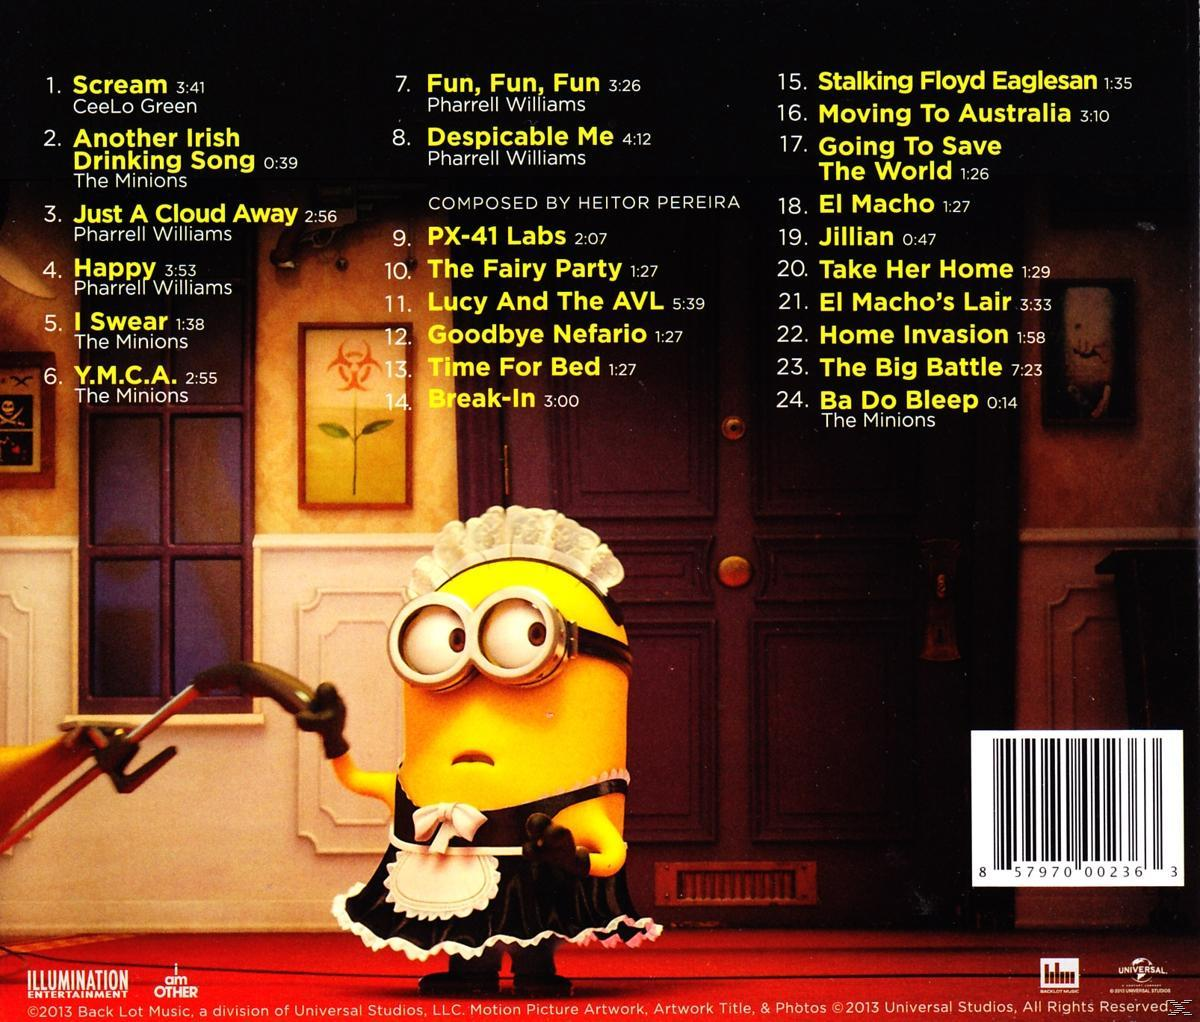 Pharrell - (CD) 2 Despicable - Me Williams